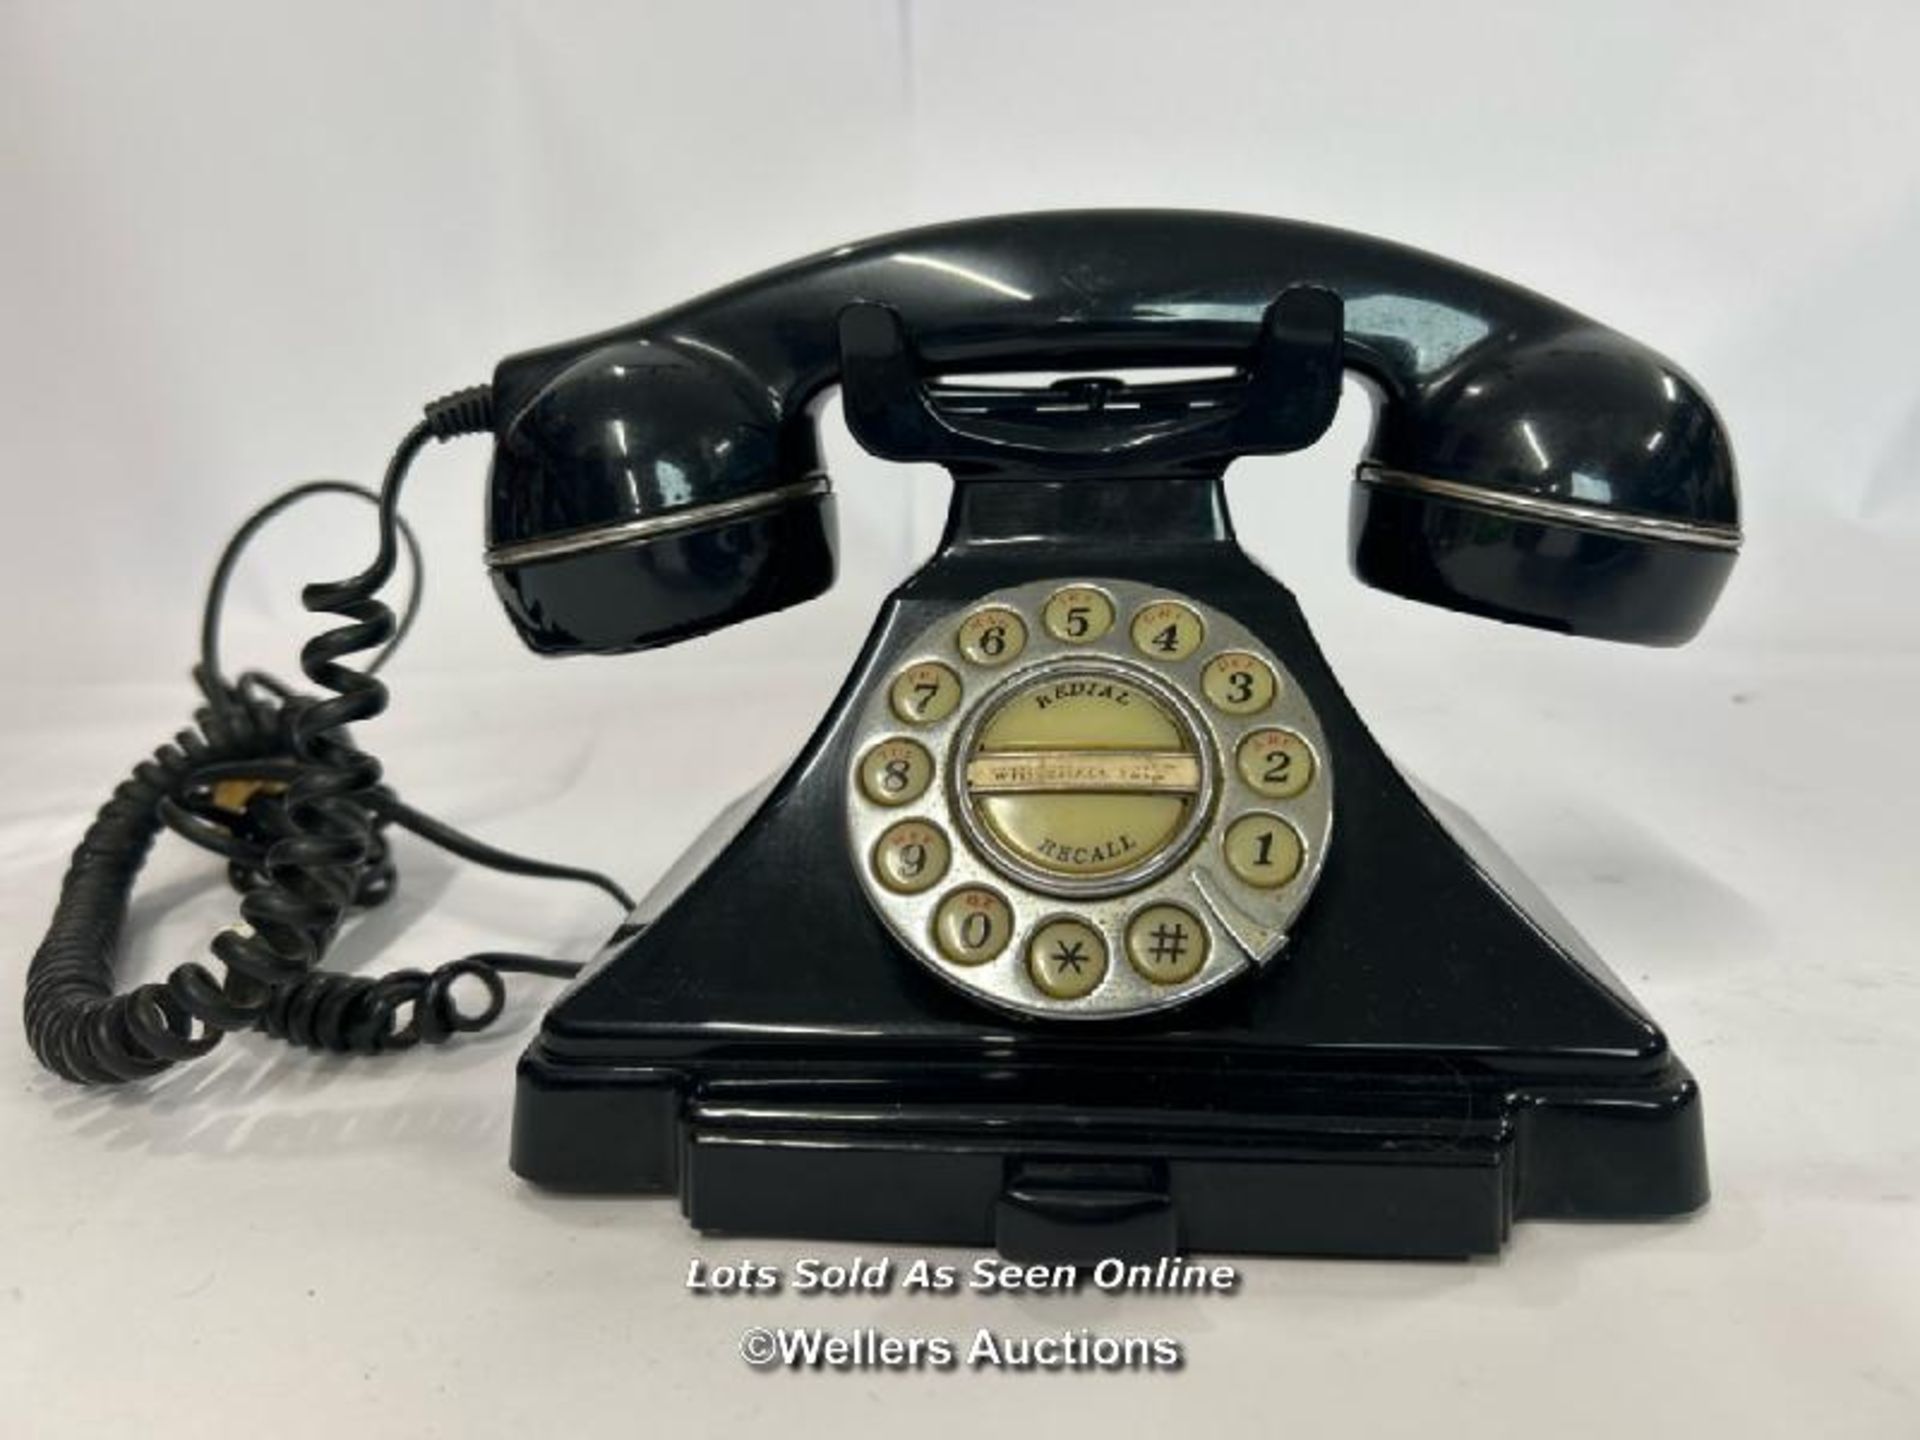 Retro Astral black telephone 'Whitehall 1212', converted to push button dial / AN9